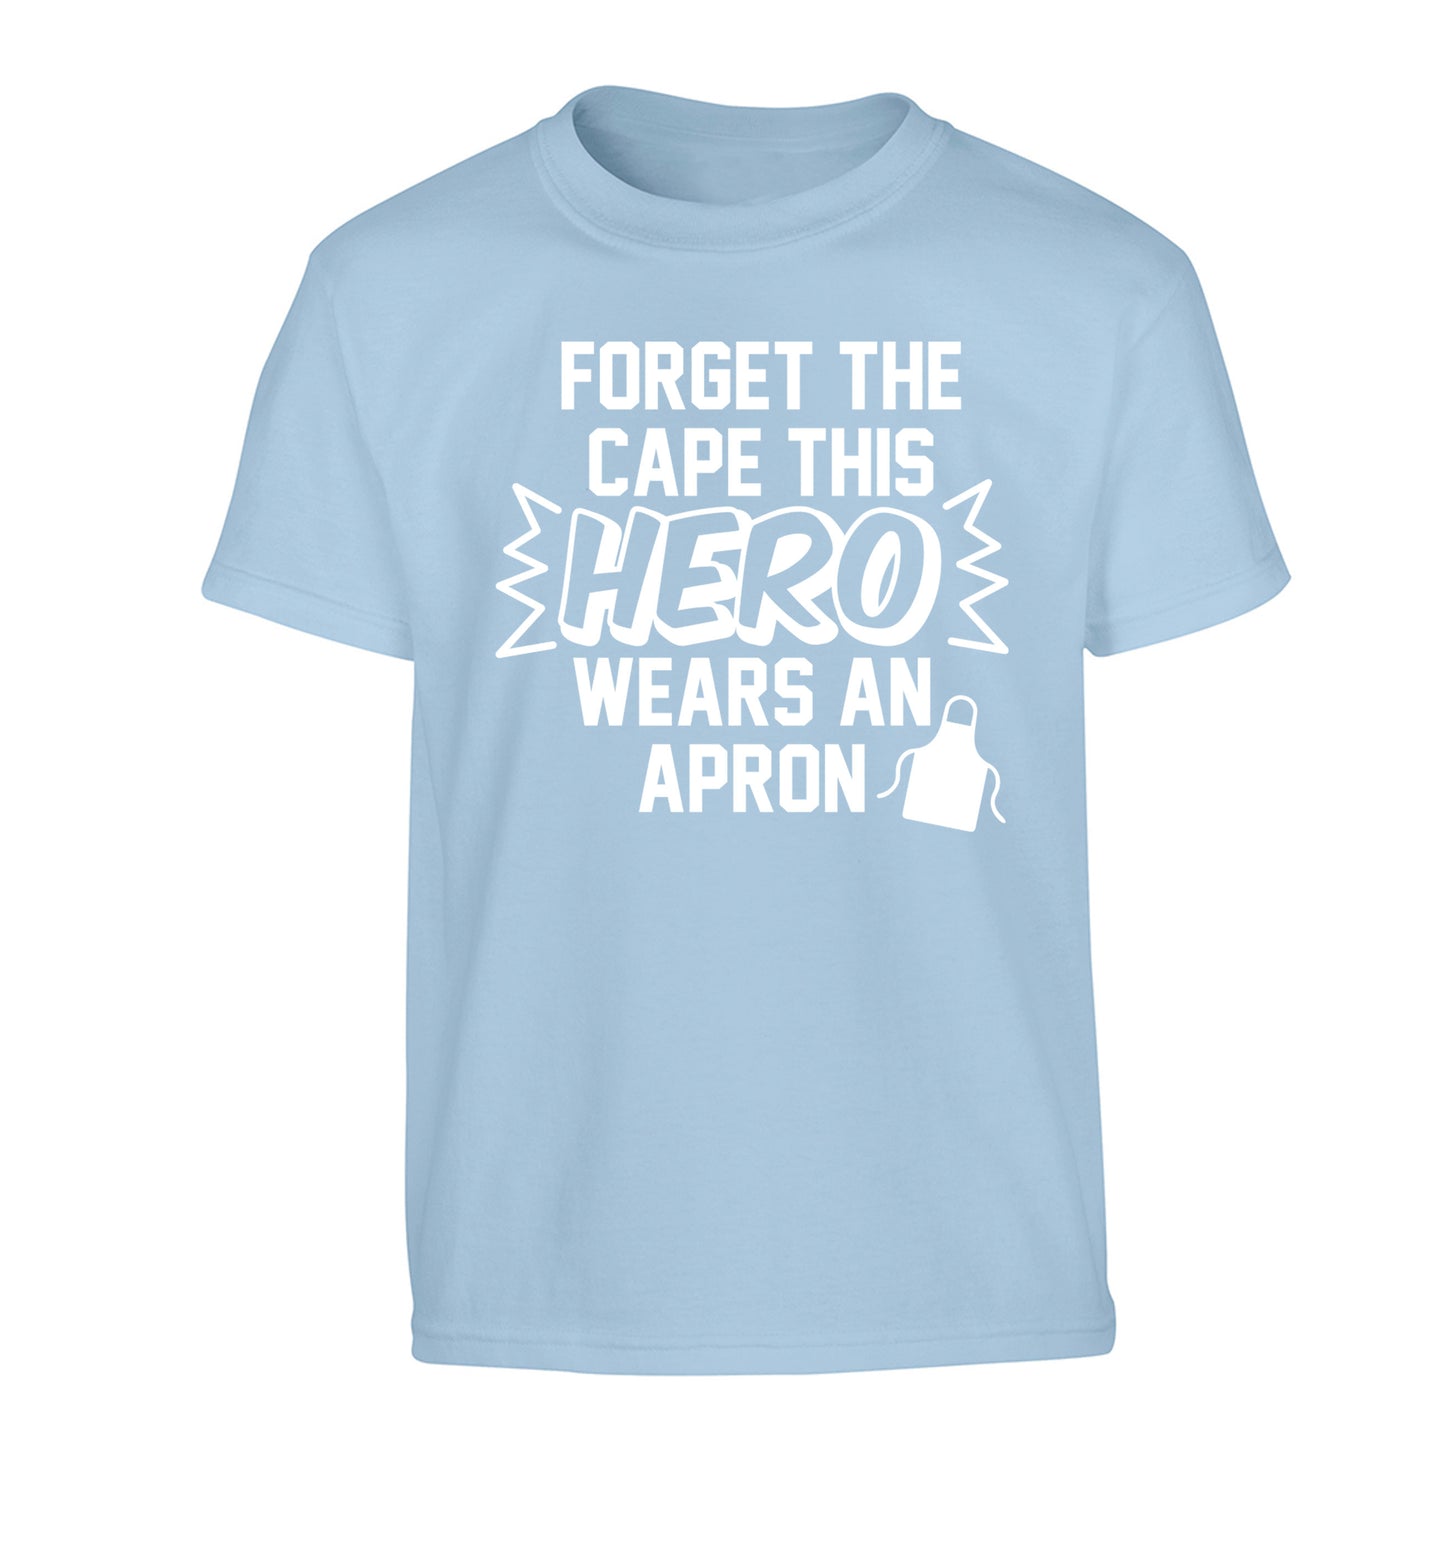 Forget the cape this hero wears an apron Children's light blue Tshirt 12-14 Years